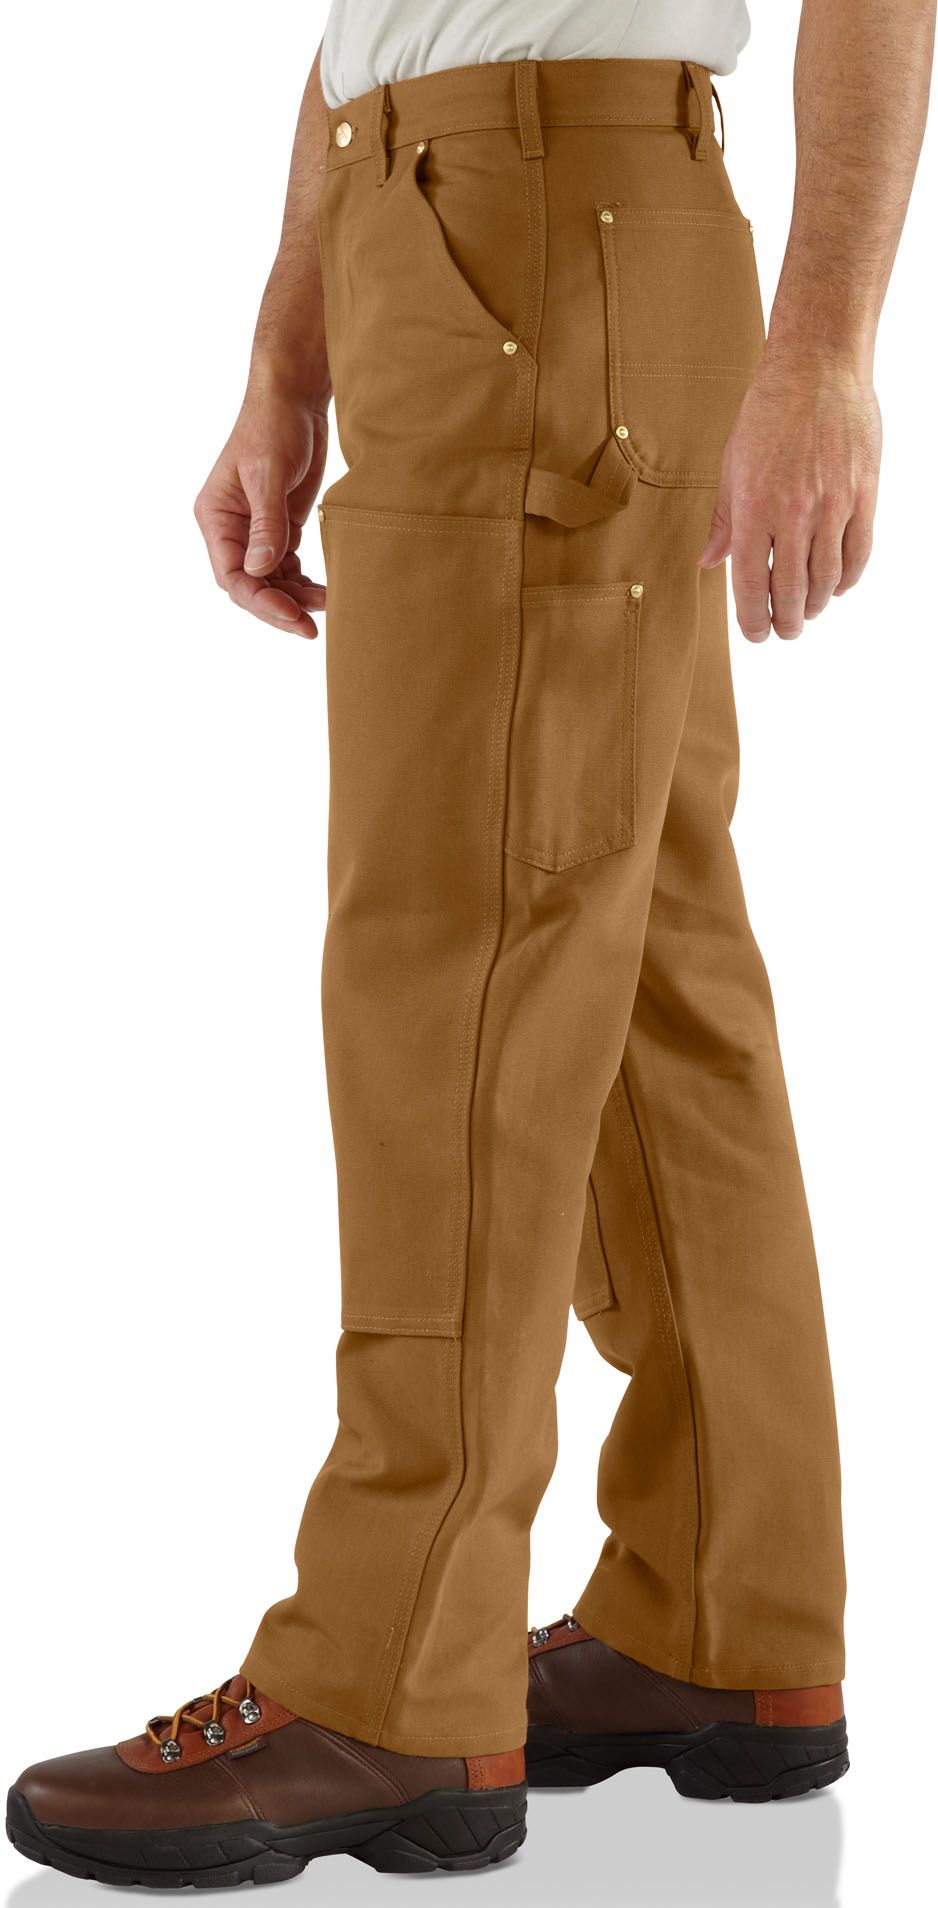 carhartt pants with knee pads